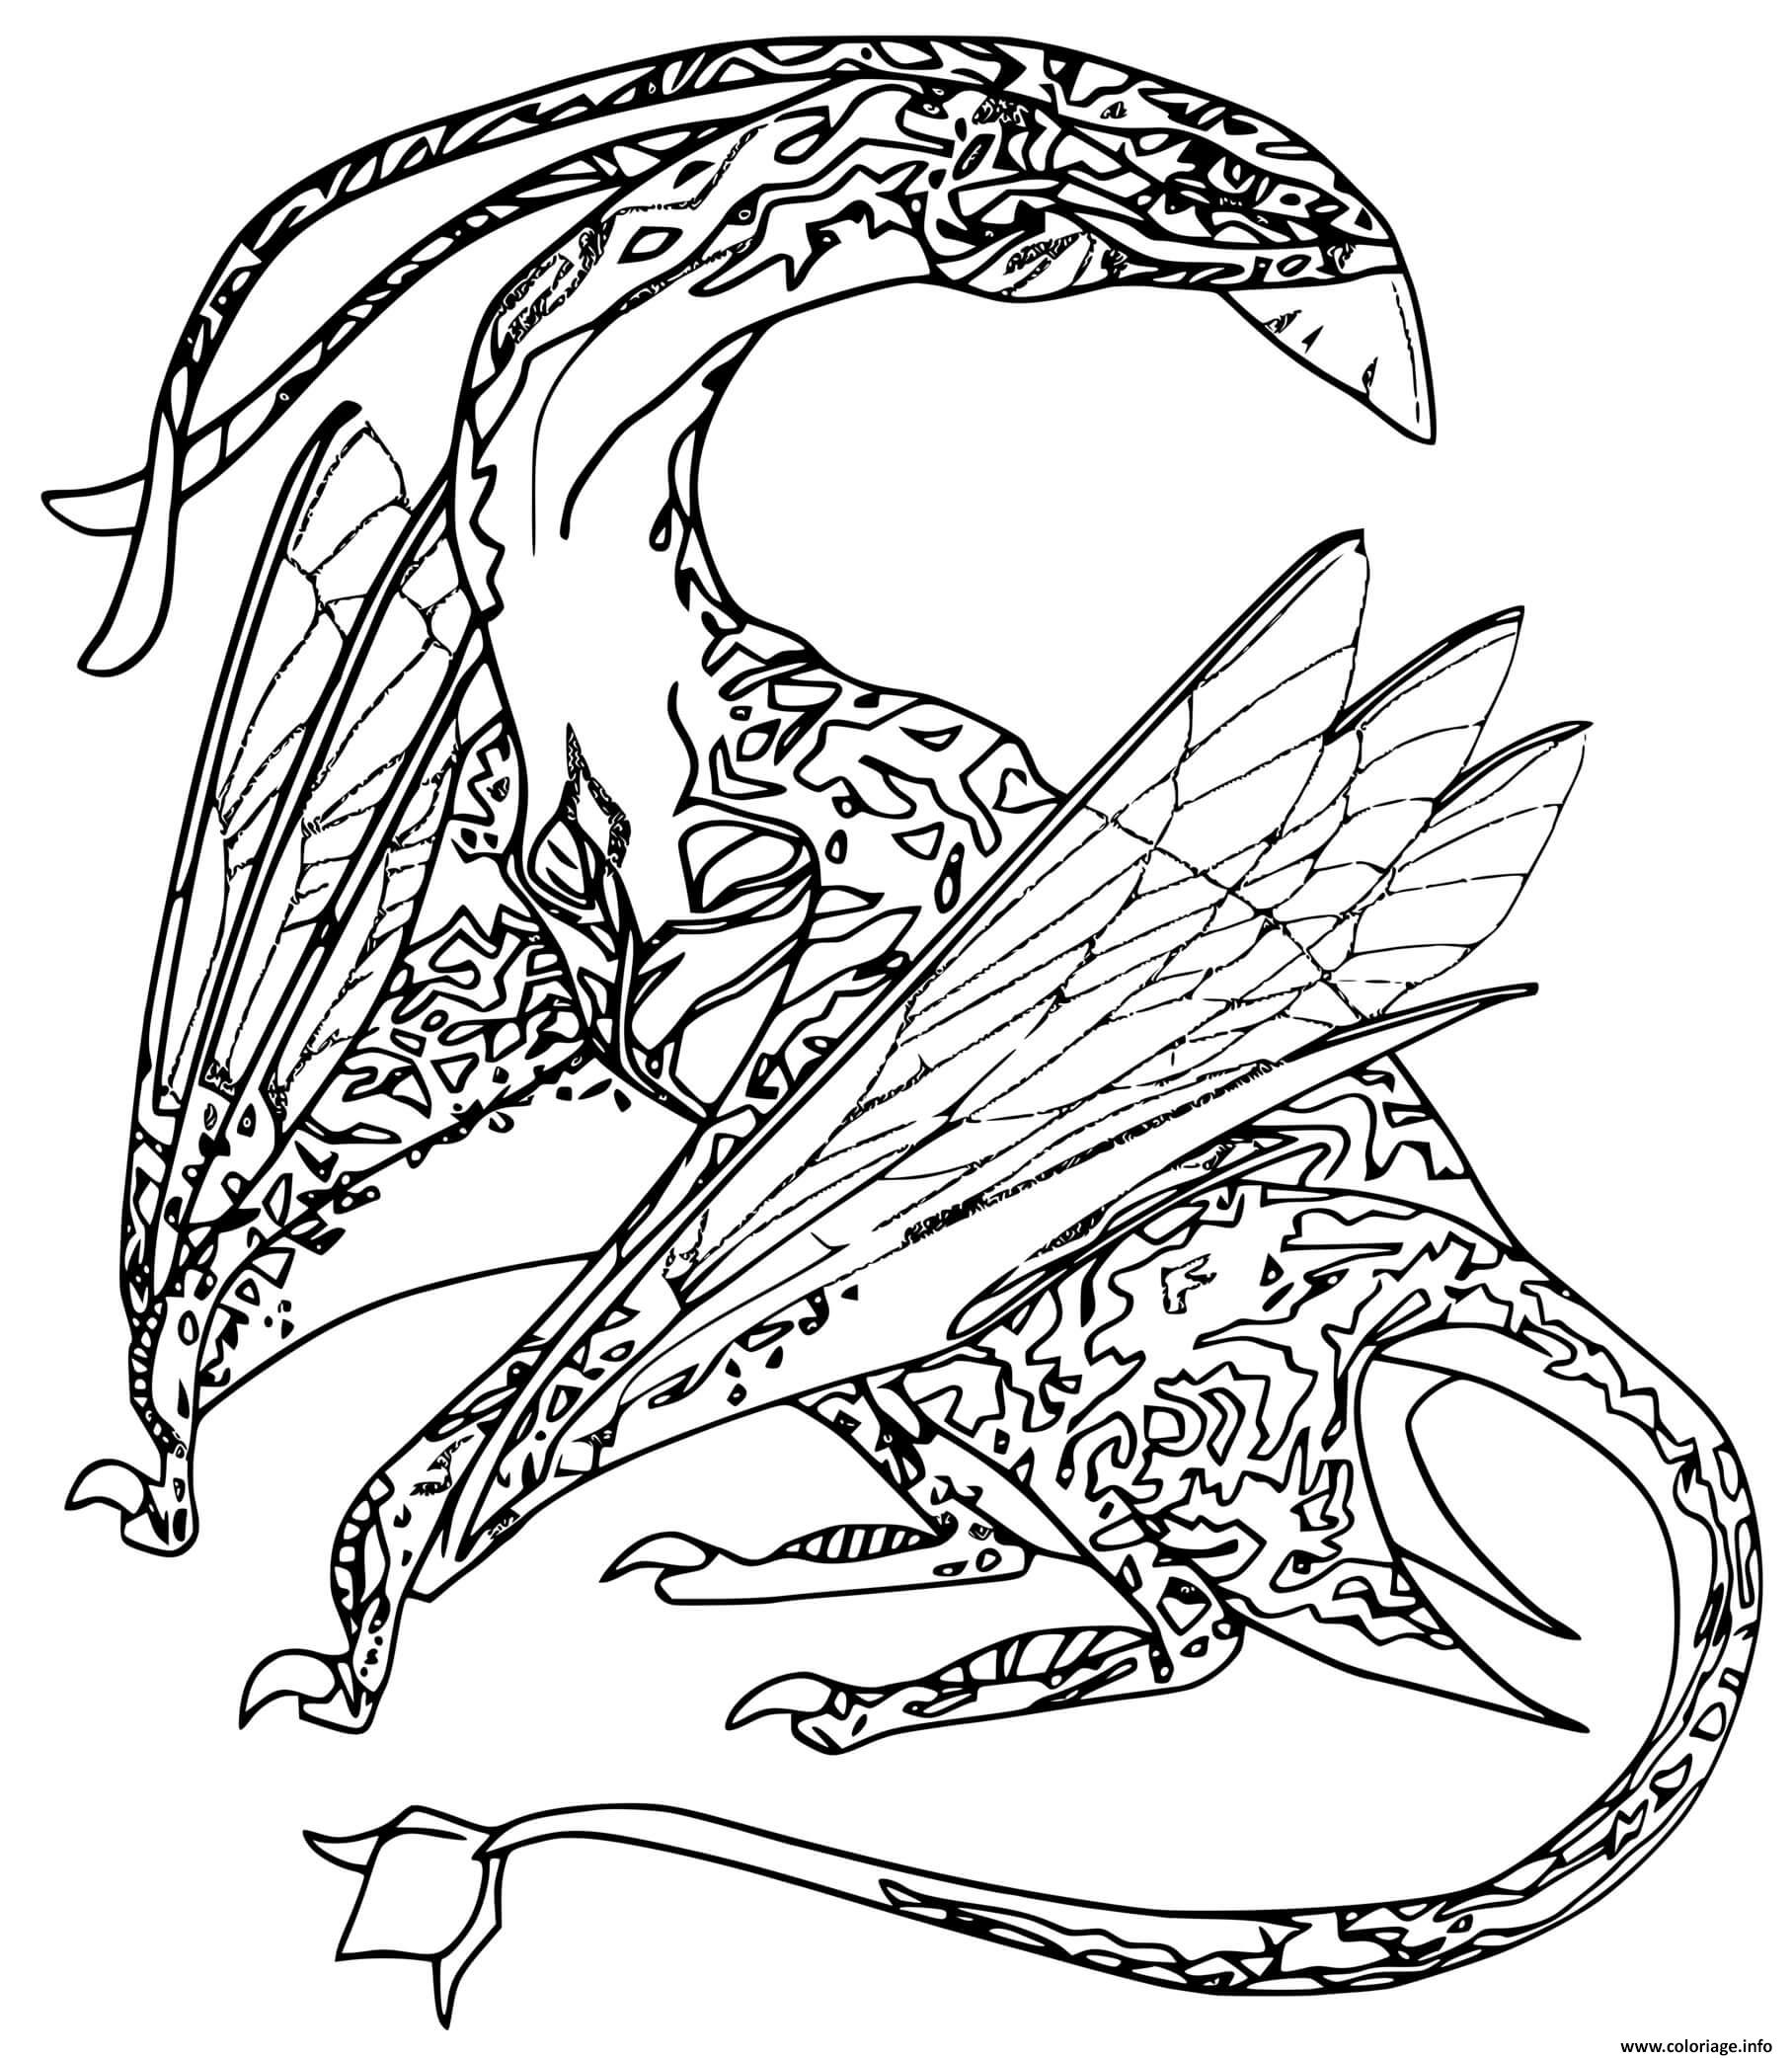 Avatar Jack Neytiri coloring page  free printable coloring pages on  colooricom